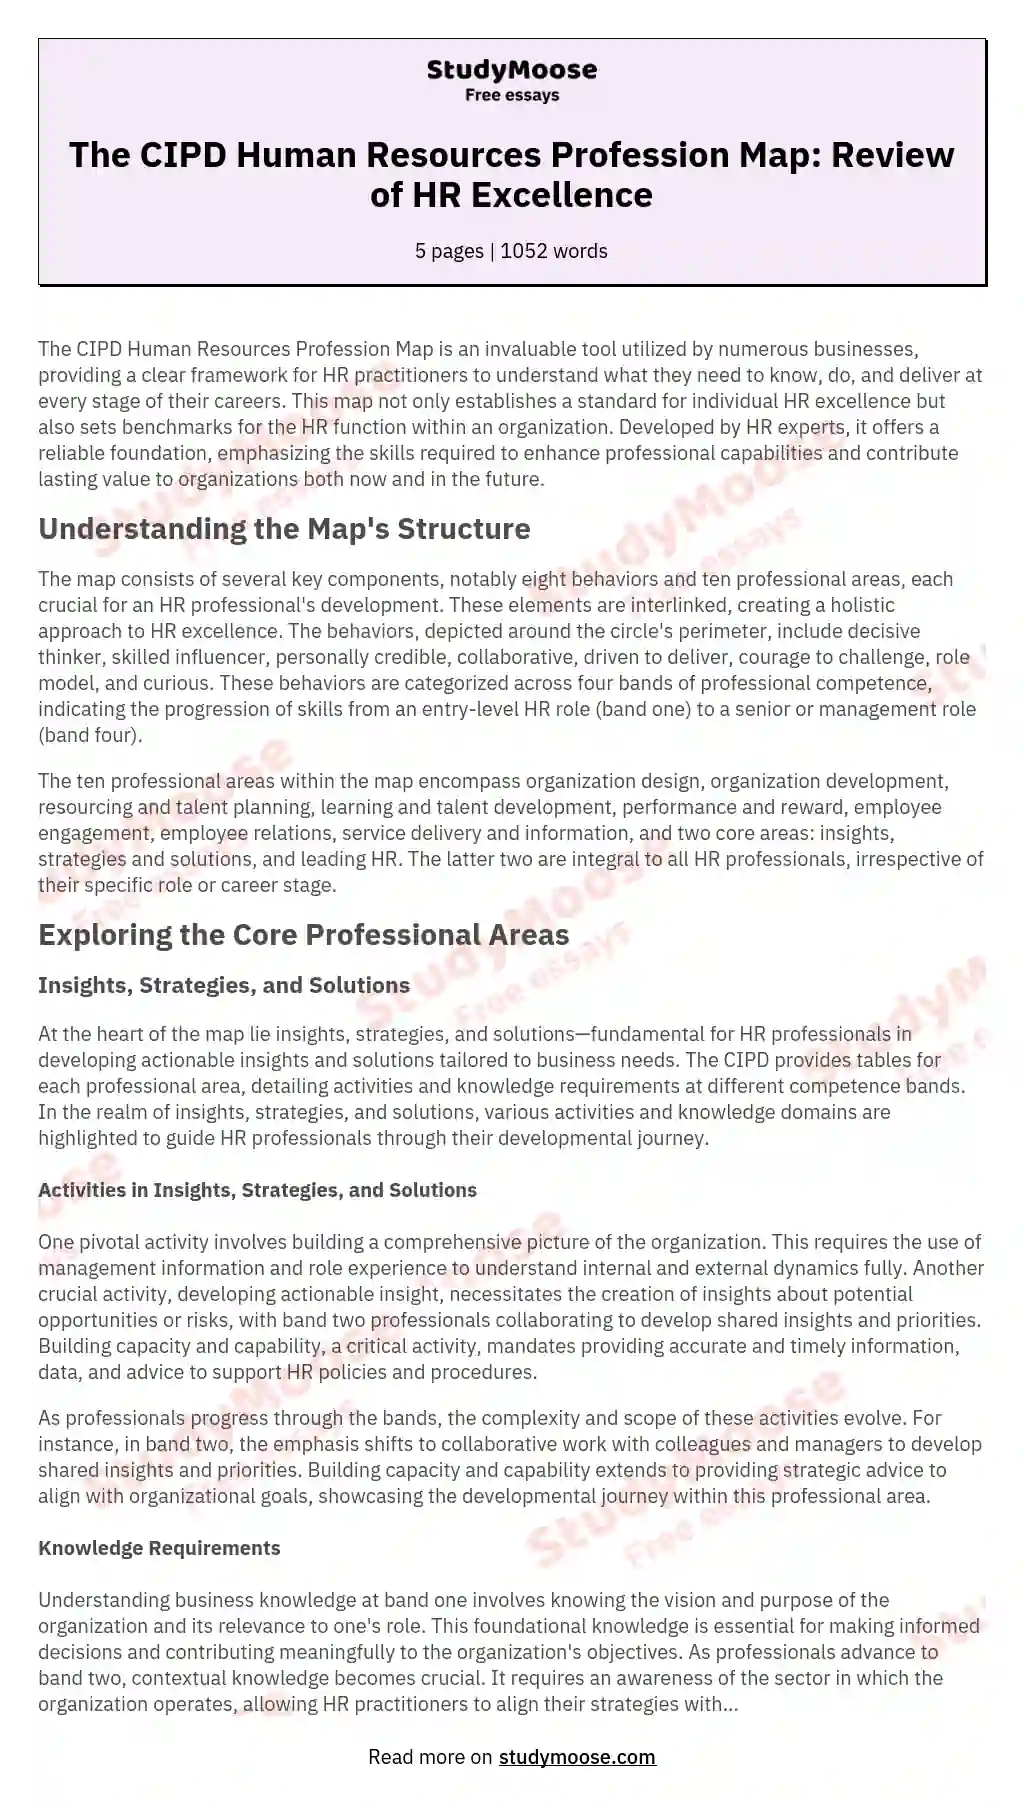 The CIPD Human Resources Profession Map: Review of HR Excellence essay